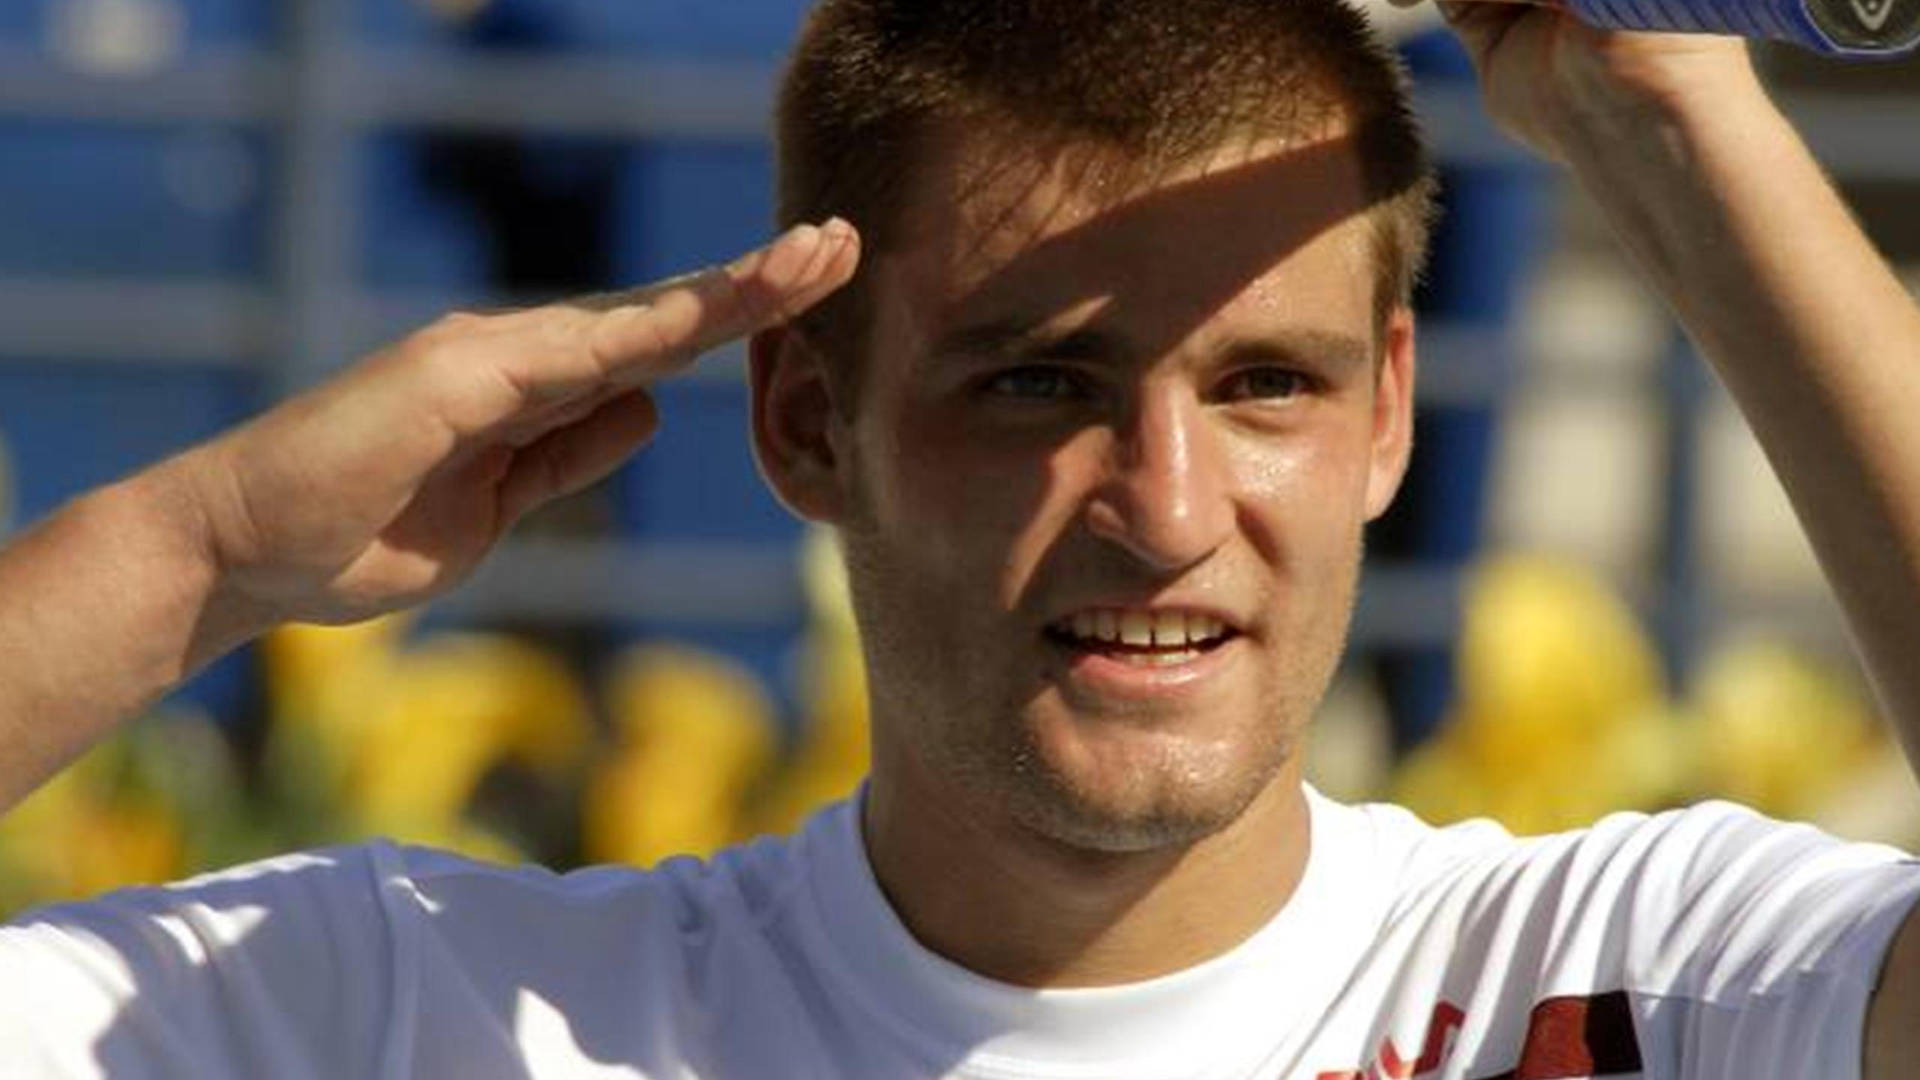 Mikhail Youzhny performing his signature hand salute on the court Wallpaper